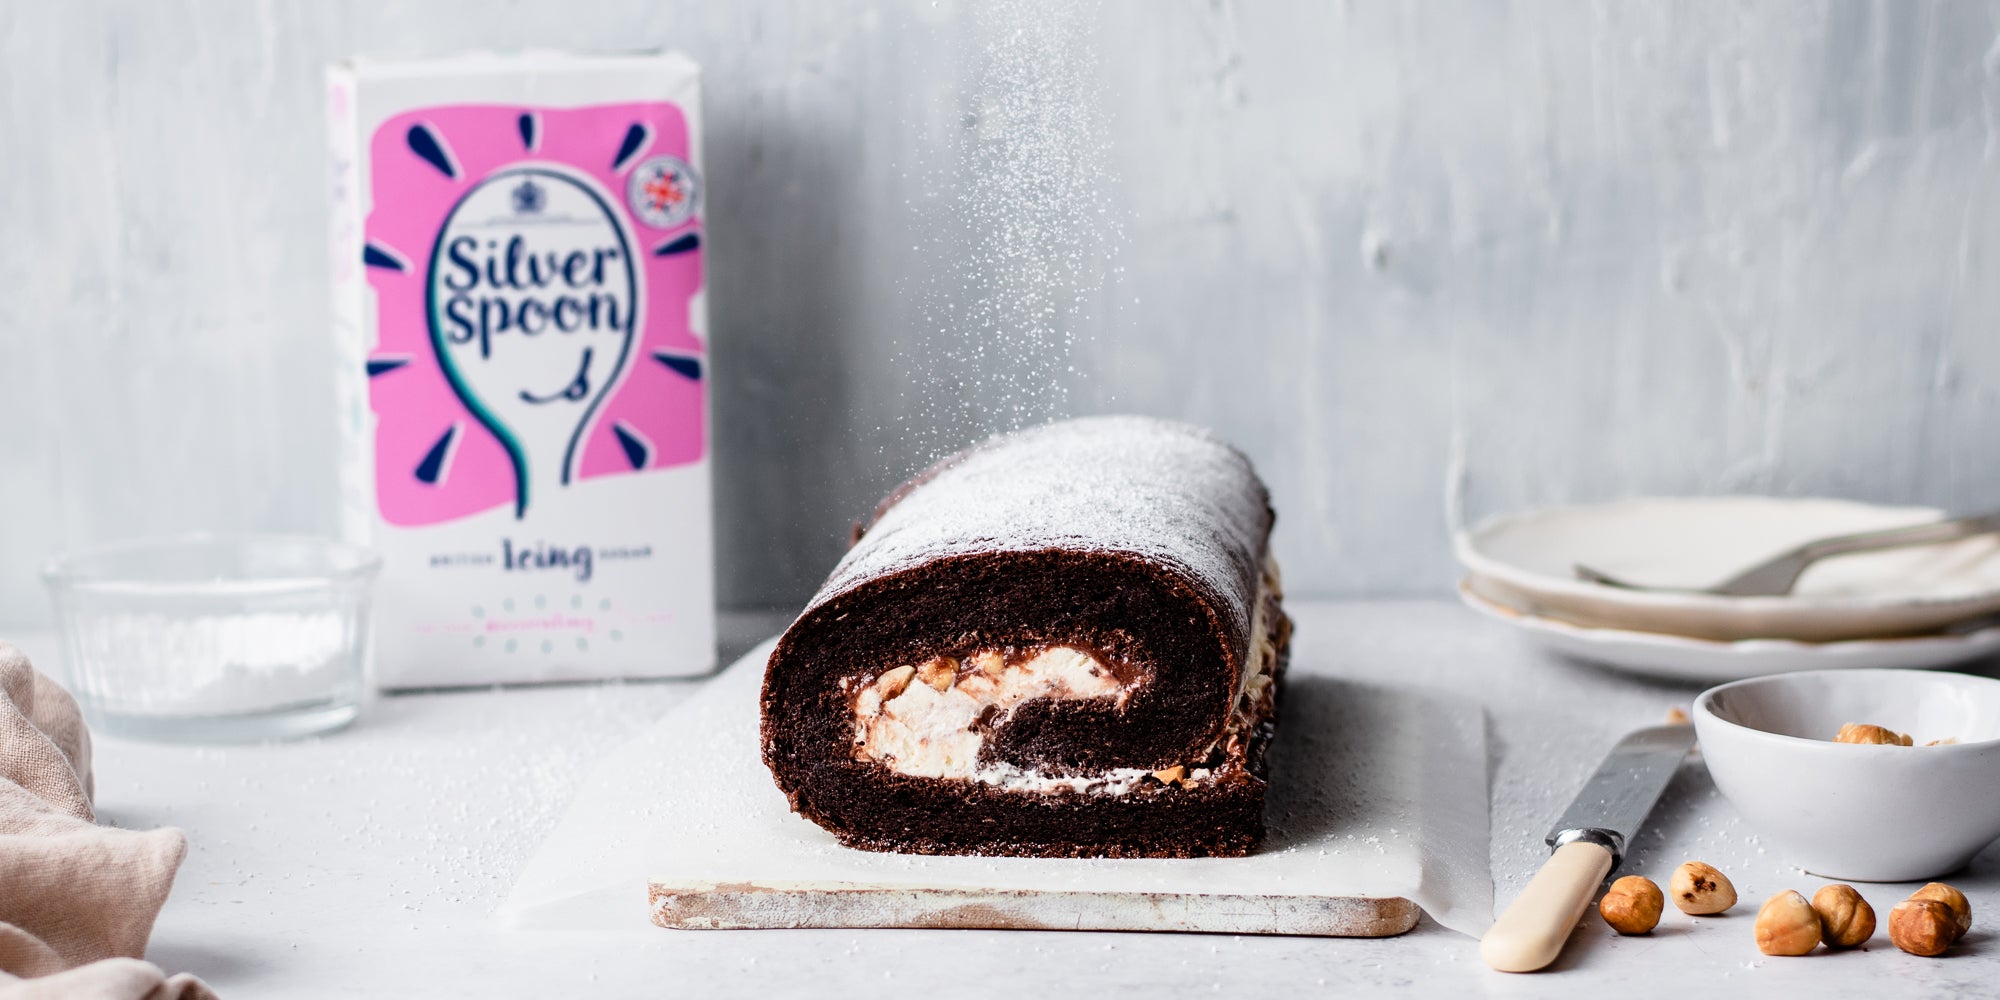 Chocolate Roulade on parchment paper on a serving board, with a box of Silver Spoon Icing Sugar in the background